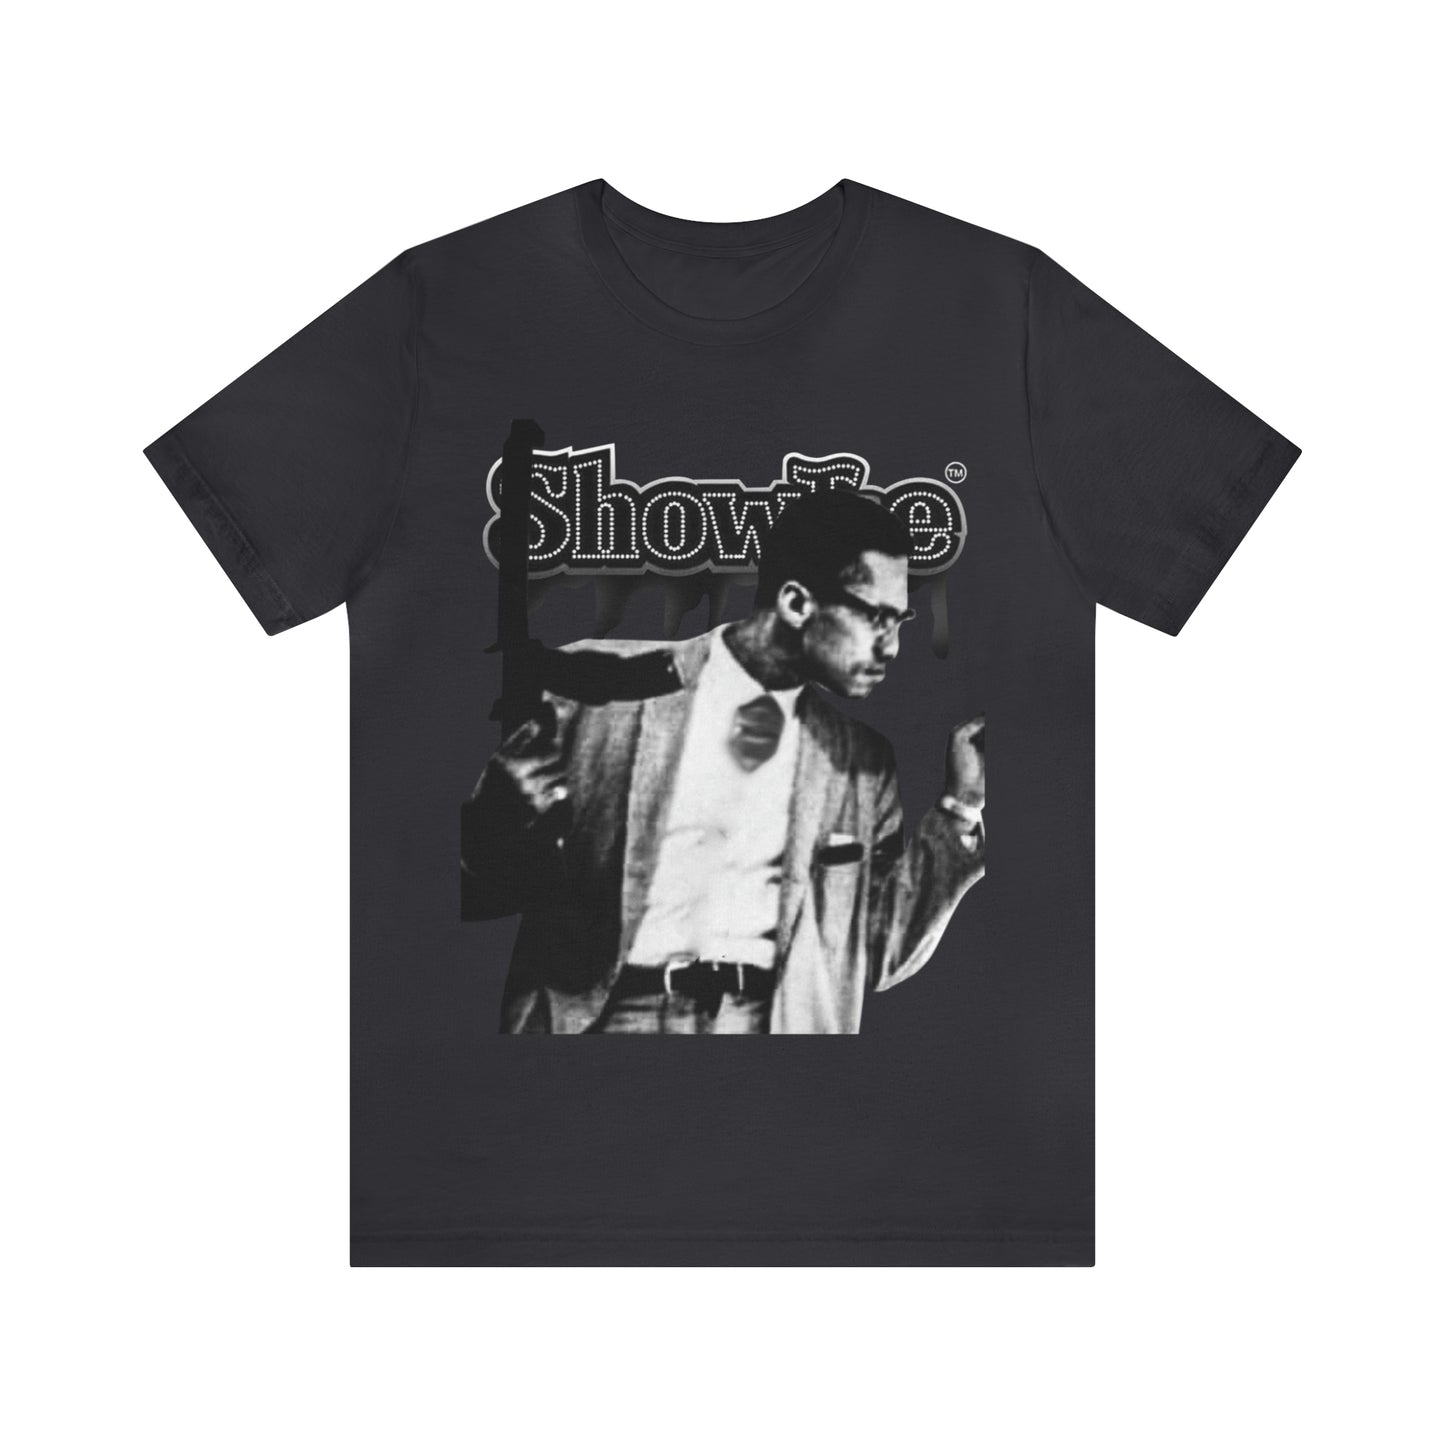 Looking for the  Short Sleeve Tee